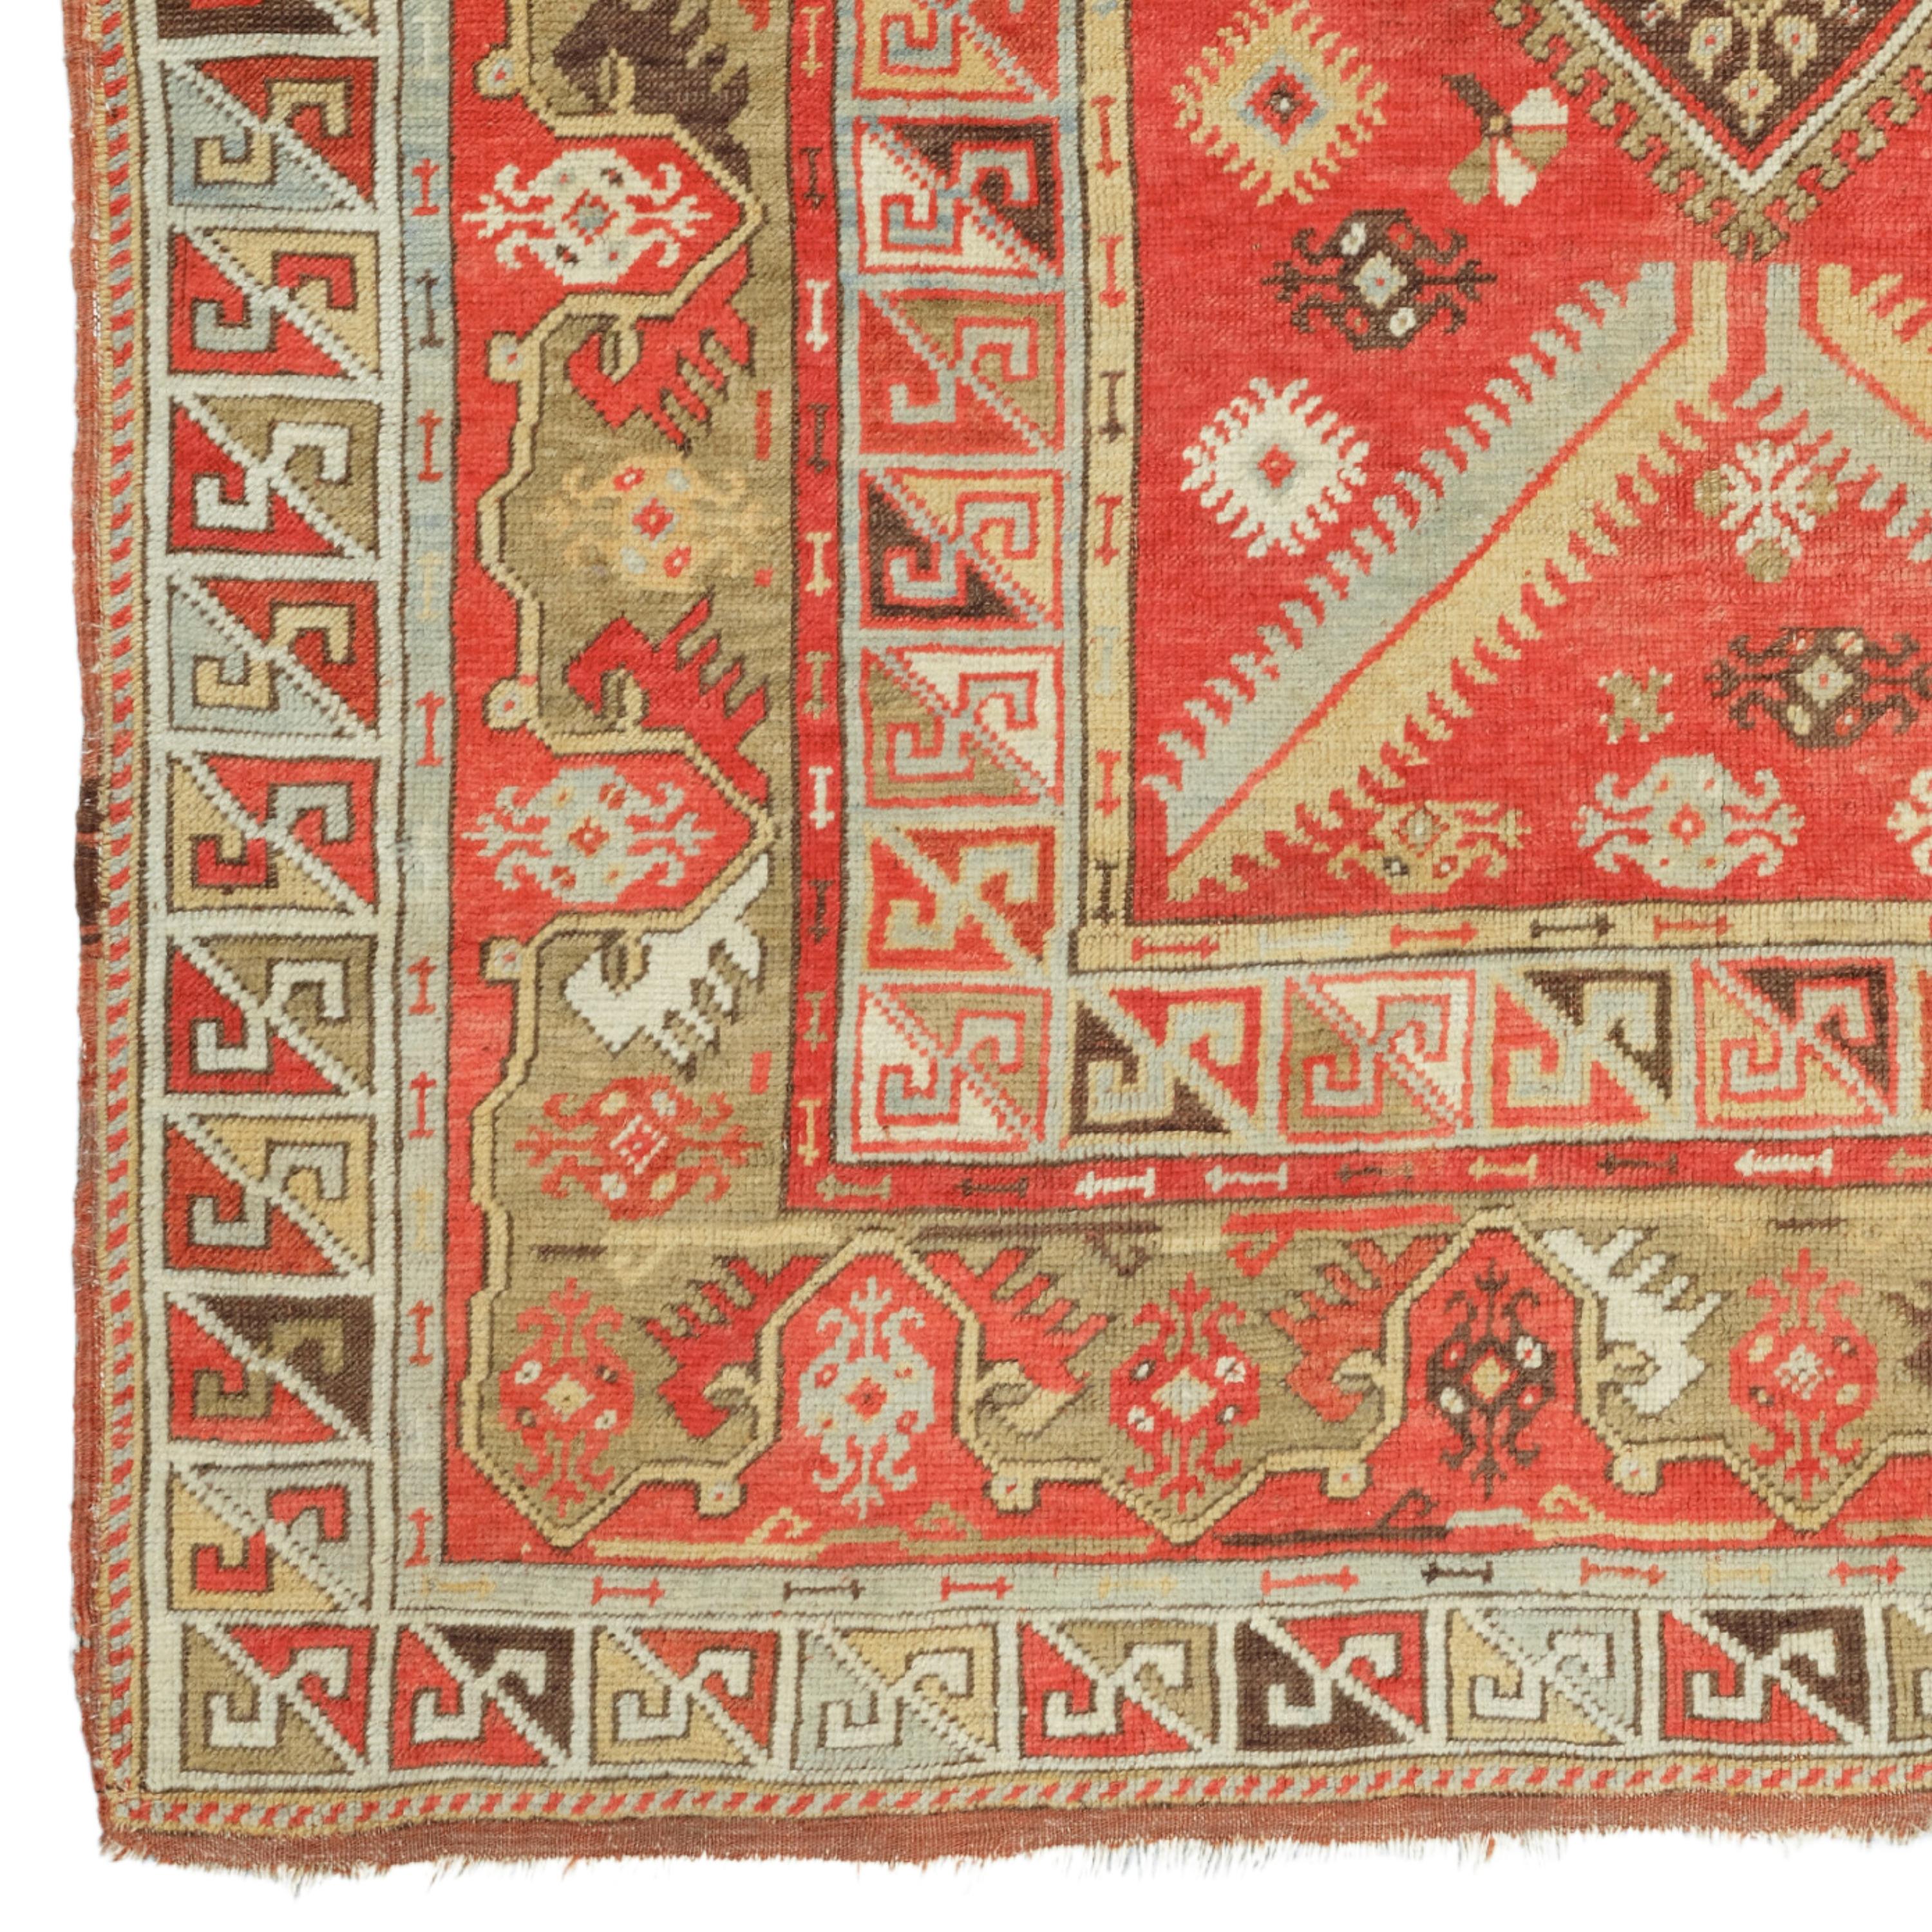 Antique Anatolian Rug - 19th Century Milas Rug

The Magnificence of the Historical Texture This antique Milas carpet is a work of art from the 19th century. The central diamond medallion and corner spandrels in contrasting colors on a rich red